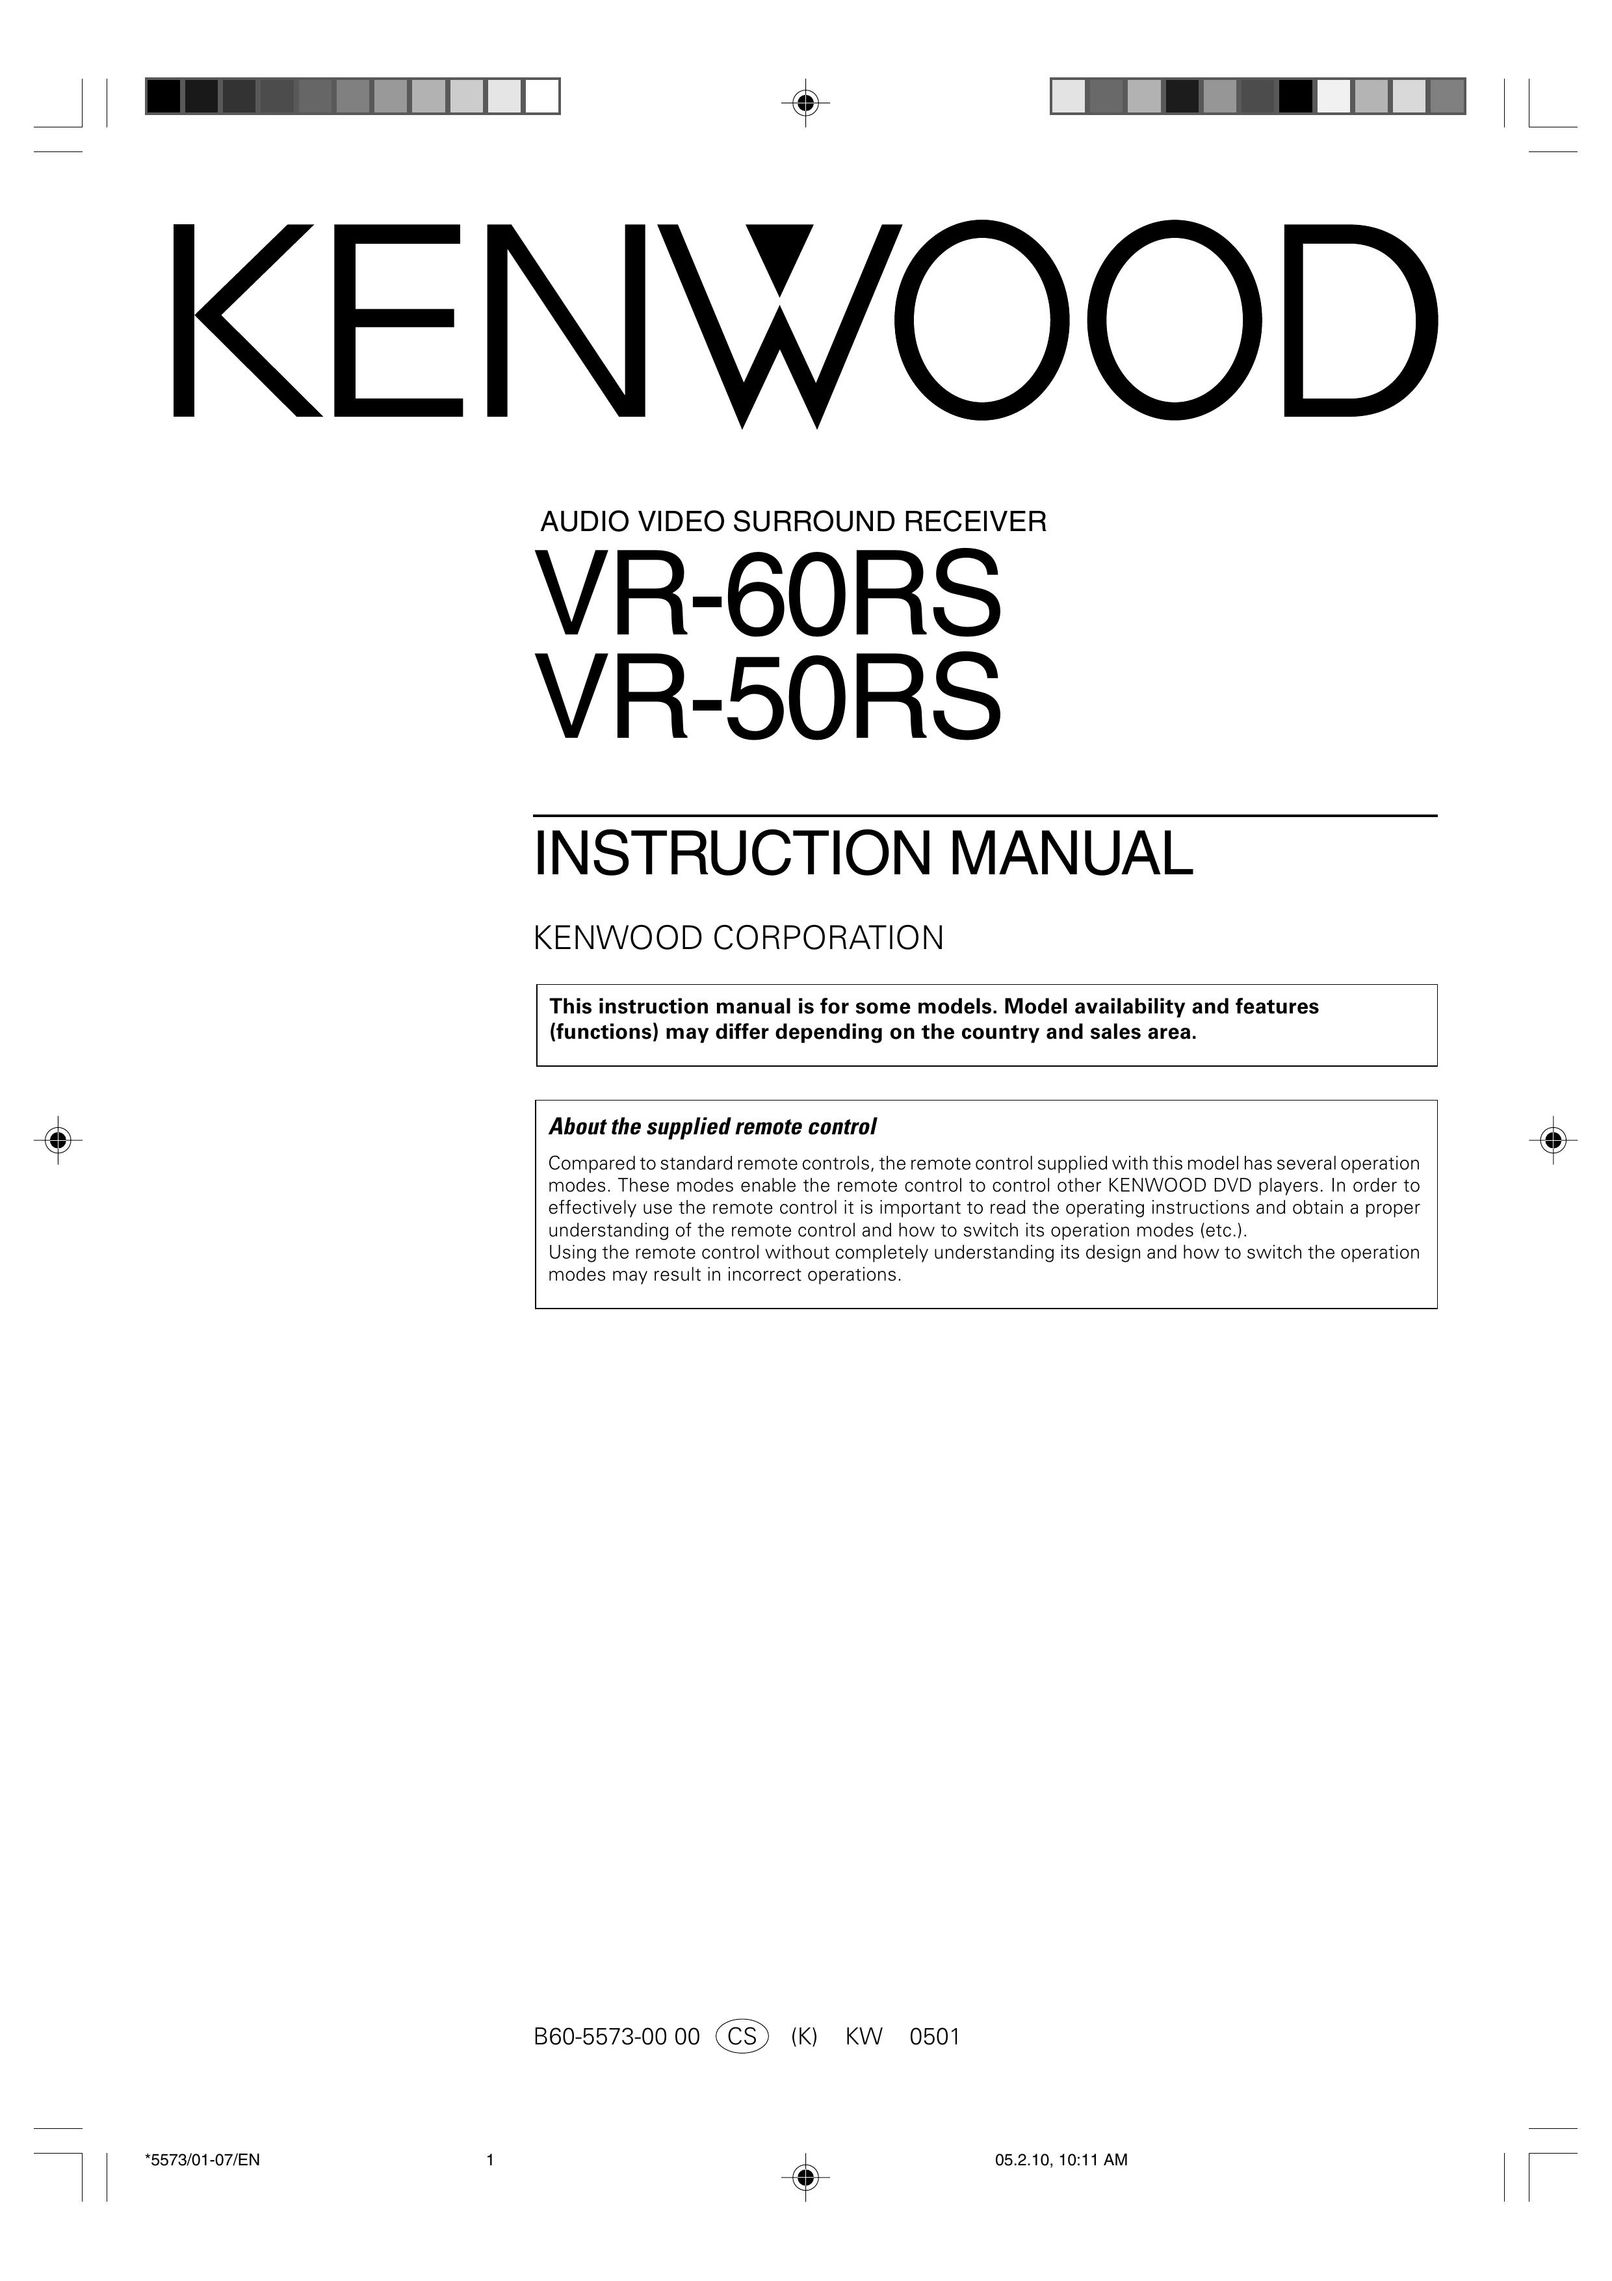 Kenwood VR-50RS Home Theater System User Manual